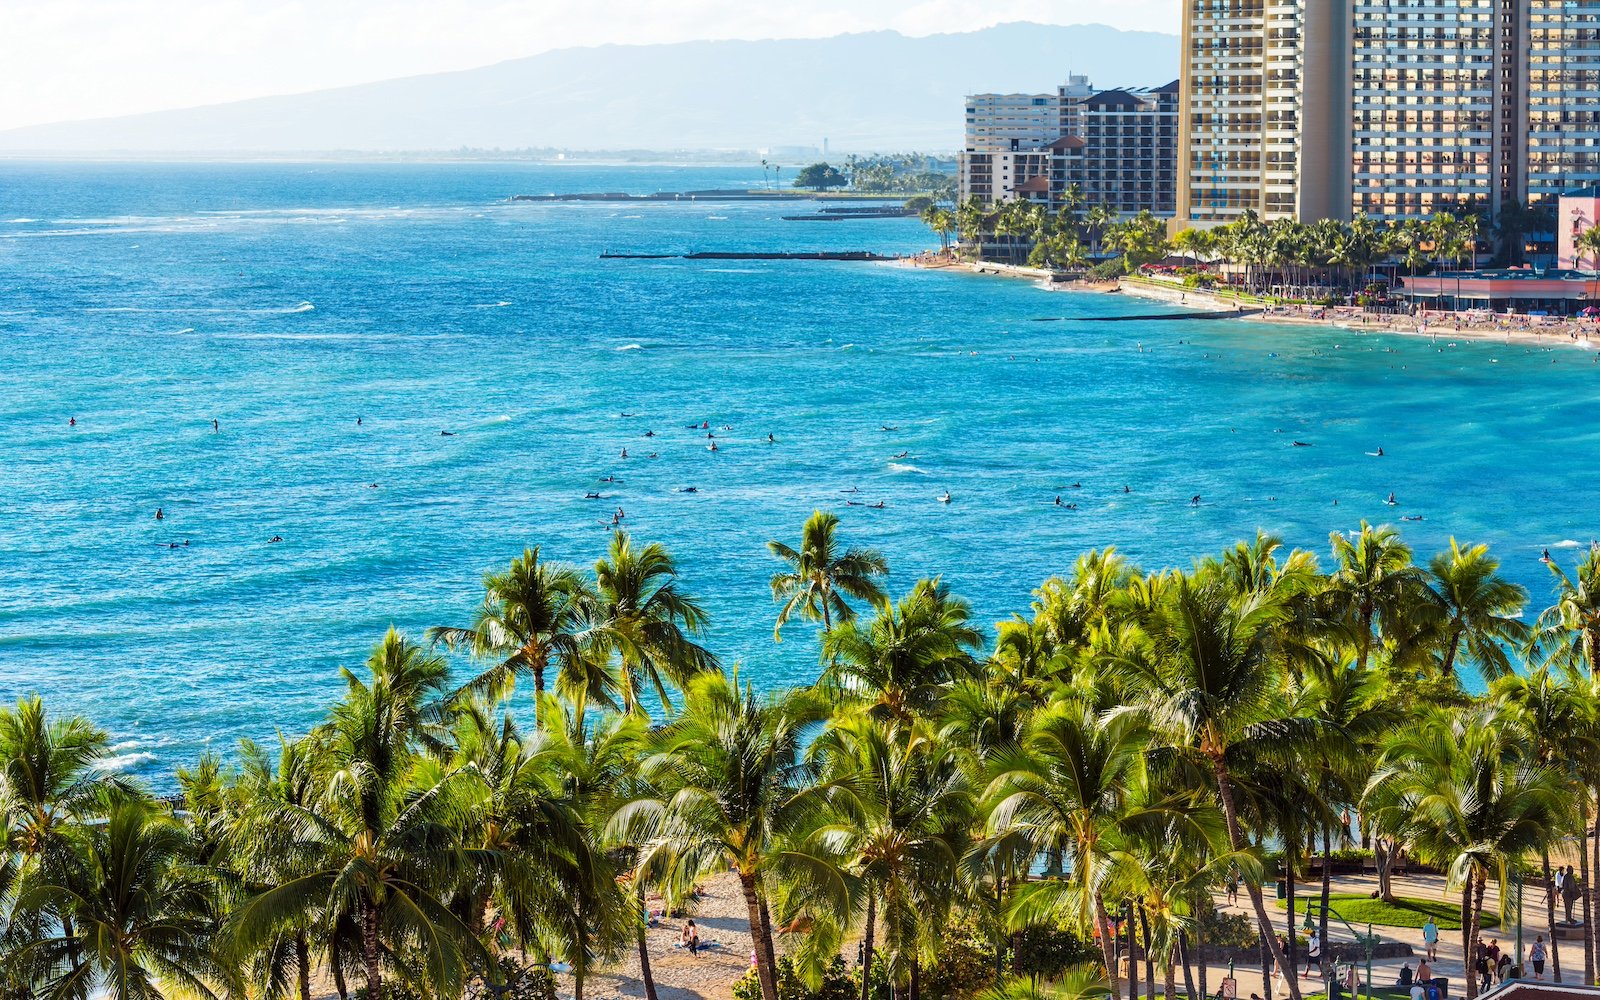 <p>Annual Salary Needed: $299,520</p> <p>The exotic locale of Honolulu comes with high costs primarily due to its geographic isolation, which affects food and energy prices. Housing is also very expensive, making the scenic beauty and tropical climate come with a high price tag.</p>